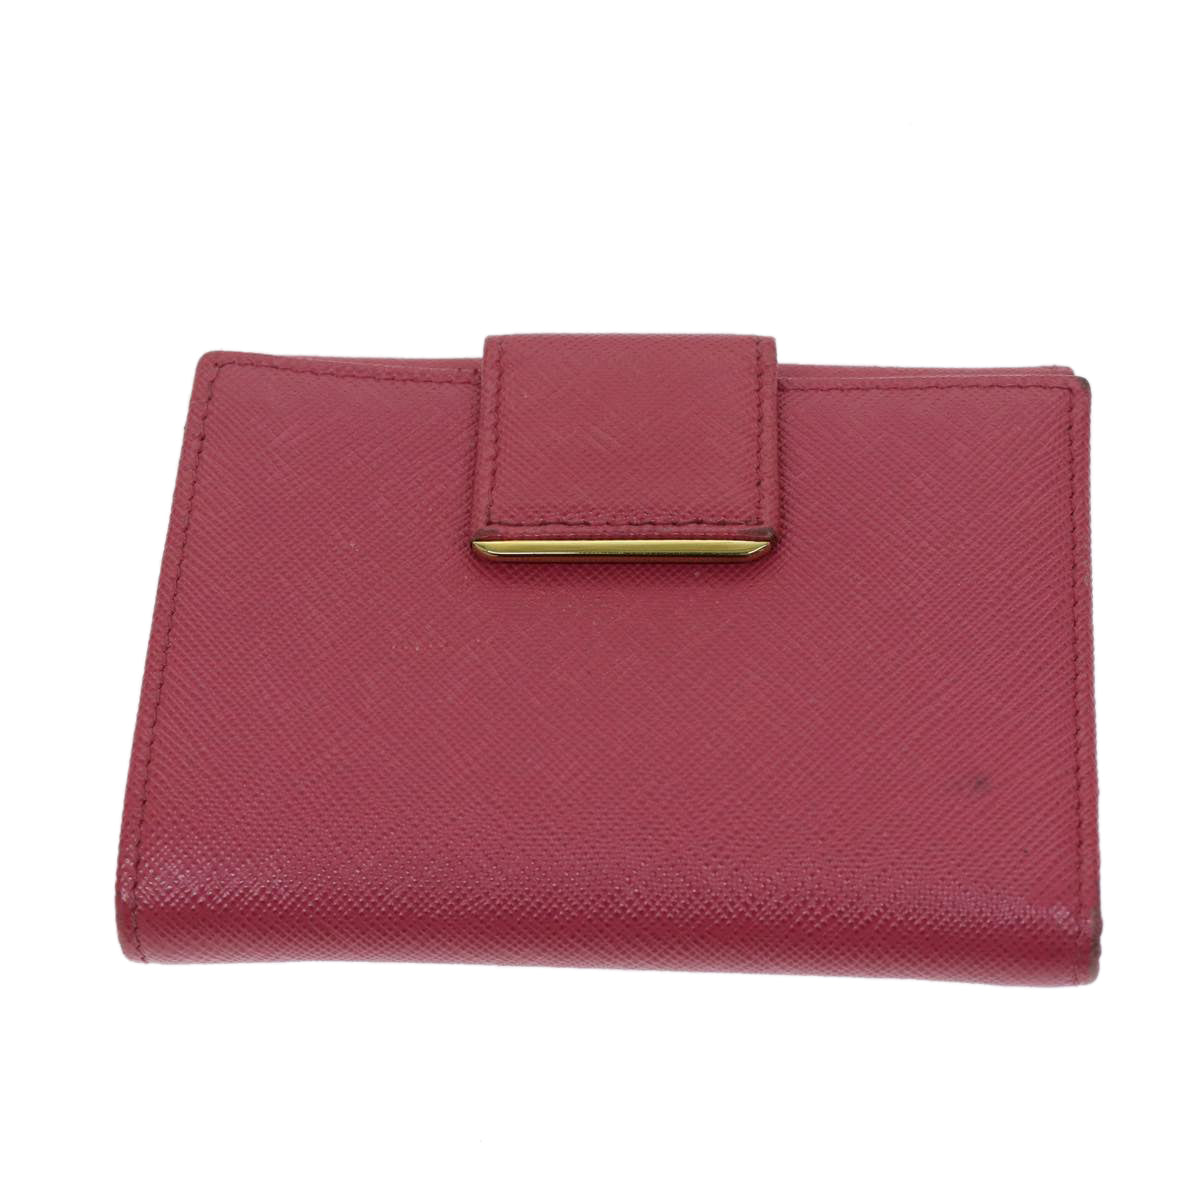 PRADA Wallet Safiano leather Pink Auth 70786 - 0